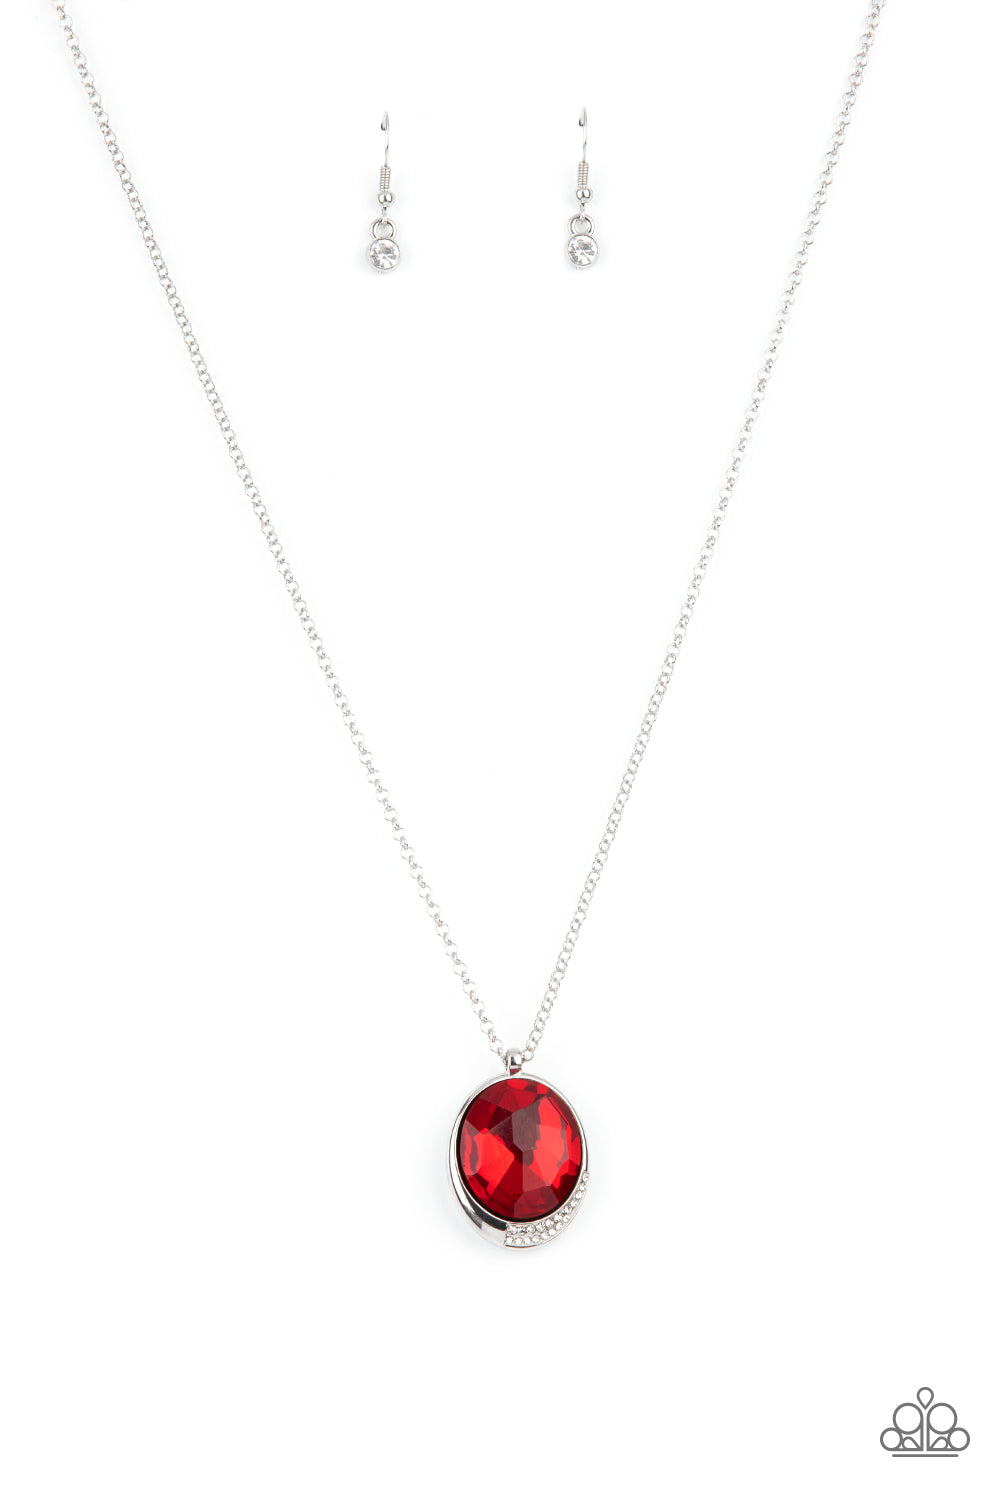 Paparazzi Accessories - Stratosphere Sparkle - Red Necklace